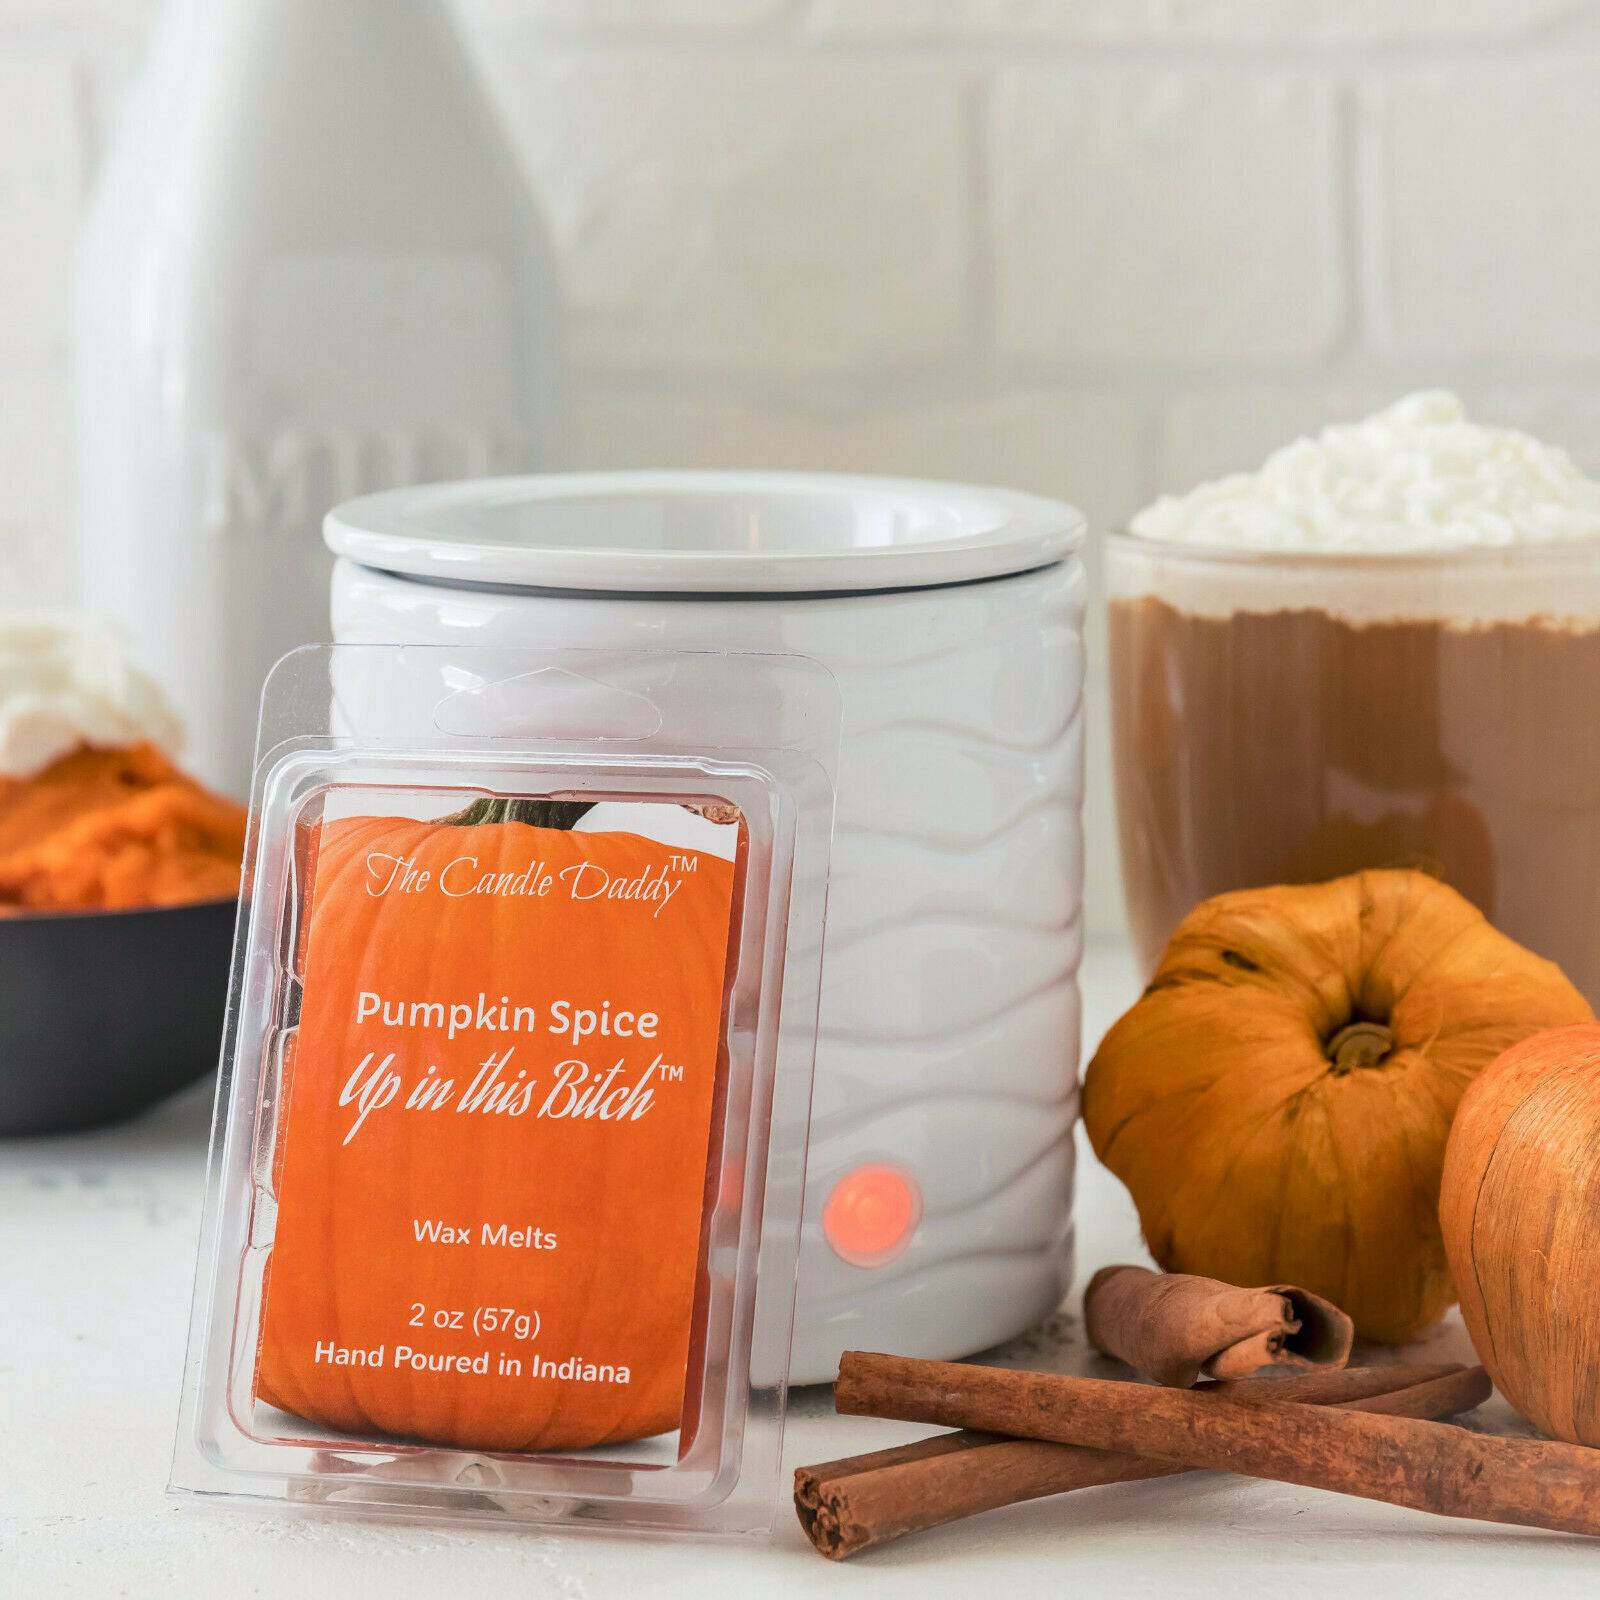 Boo! - Pumpkin Spice Scented Wax Melts - 1 Pack - 2 Ounces - 6